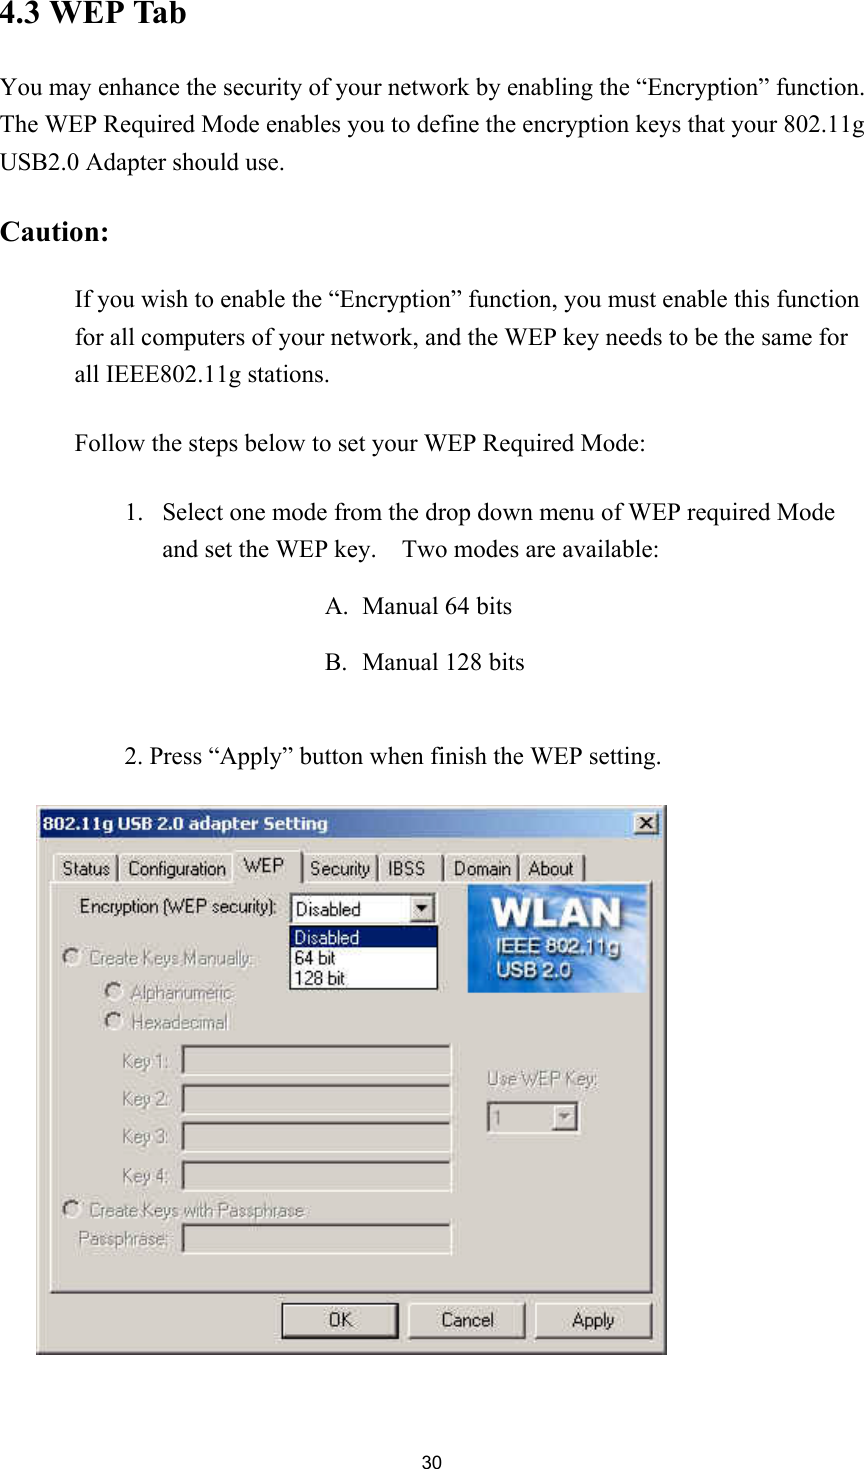 304.3 WEP TabYou may enhance the security of your network by enabling the “Encryption” function.The WEP Required Mode enables you to define the encryption keys that your 802.11gUSB2.0 Adapter should use.Caution:If you wish to enable the “Encryption” function, you must enable this functionfor all computers of your network, and the WEP key needs to be the same forall IEEE802.11g stations.Follow the steps below to set your WEP Required Mode:1. Select one mode from the drop down menu of WEP required Modeand set the WEP key.    Two modes are available:A. Manual 64 bitsB. Manual 128 bits2. Press “Apply” button when finish the WEP setting.